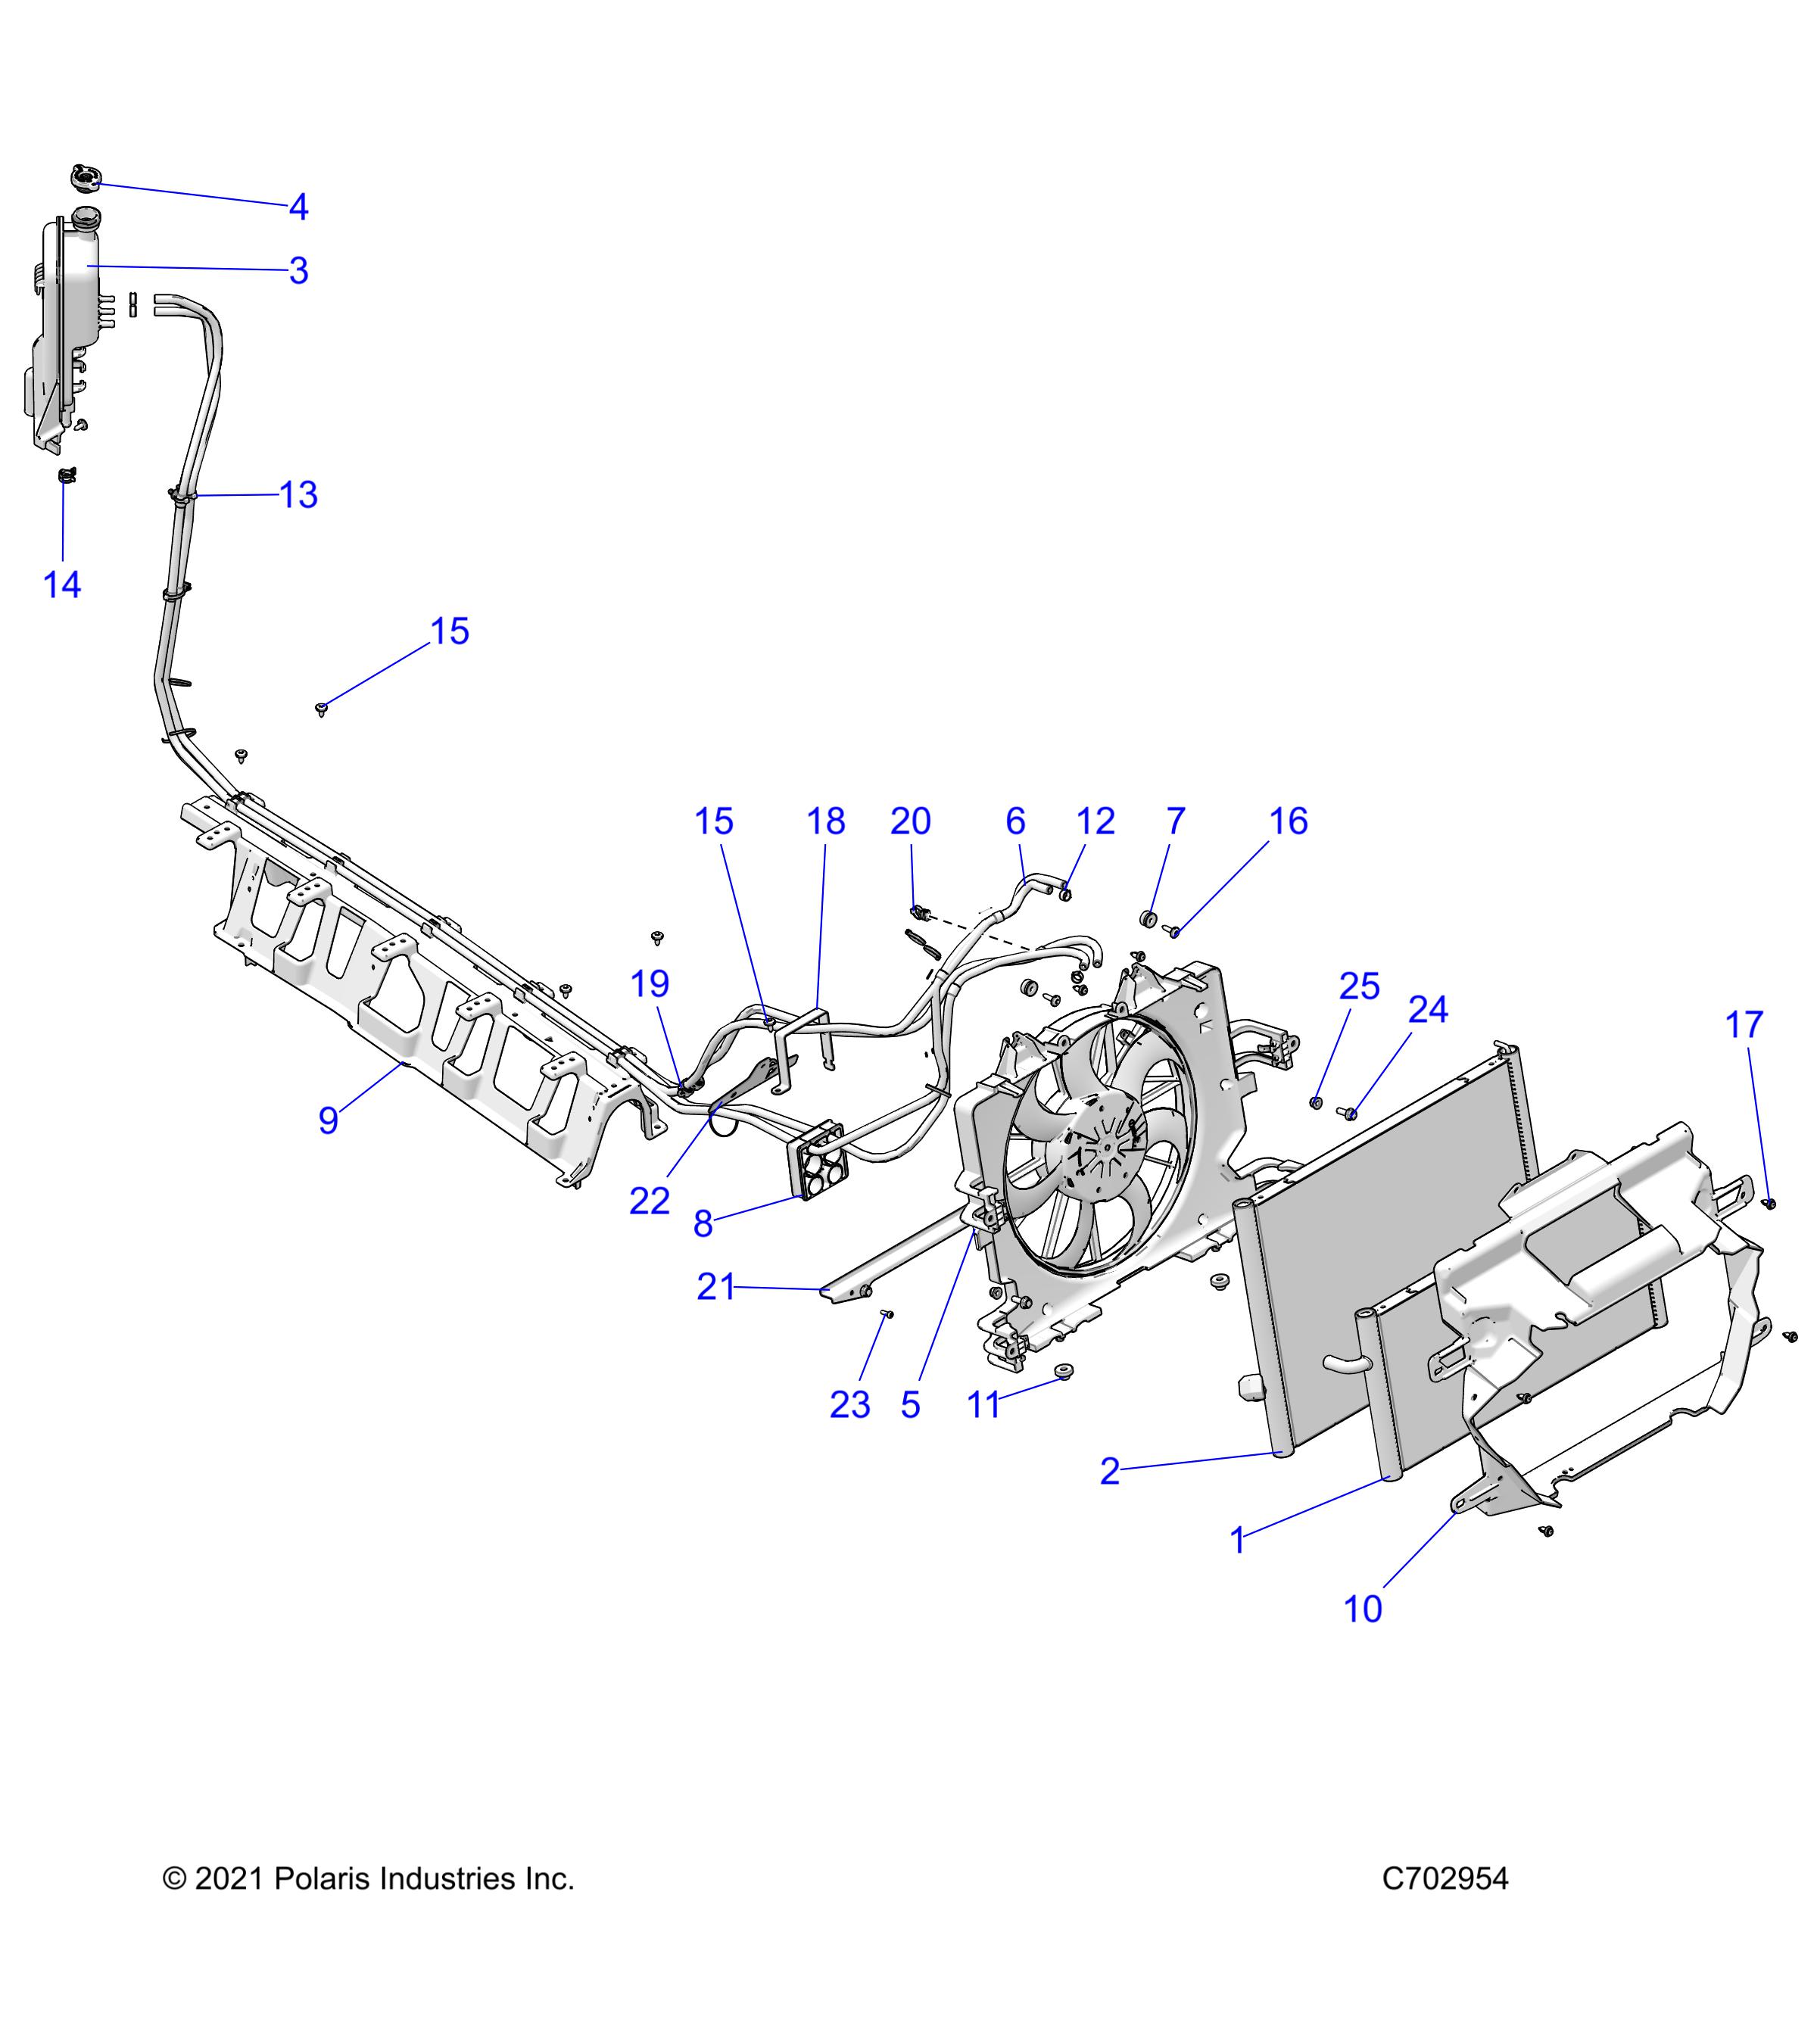 Part Number : 2415640 FAN-ASSEMBLY